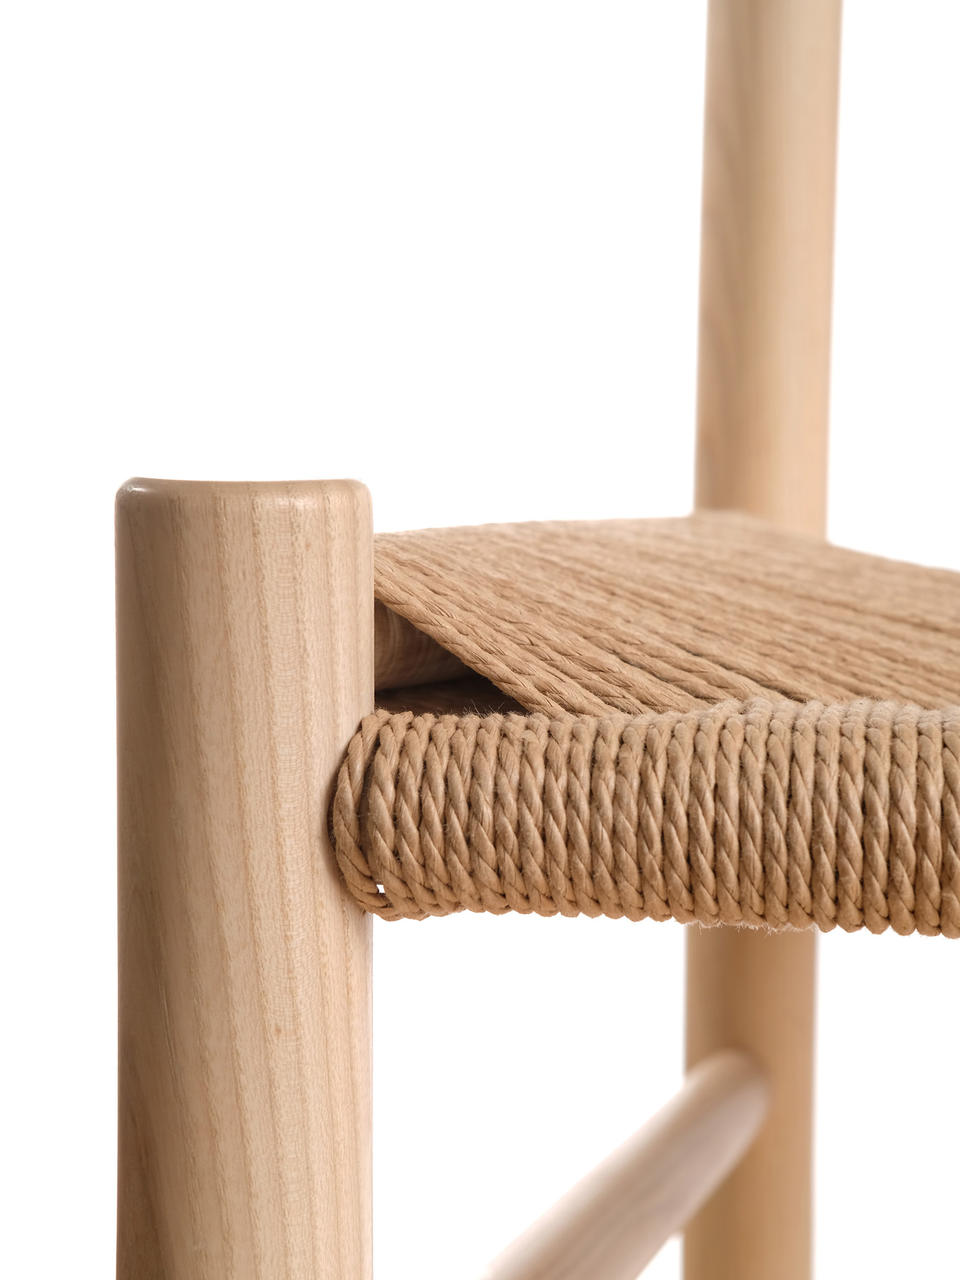 Detail photo of a replica of the Borge Mogensen designed J39 chair created referencing a CAD model intended for interior design renderings.